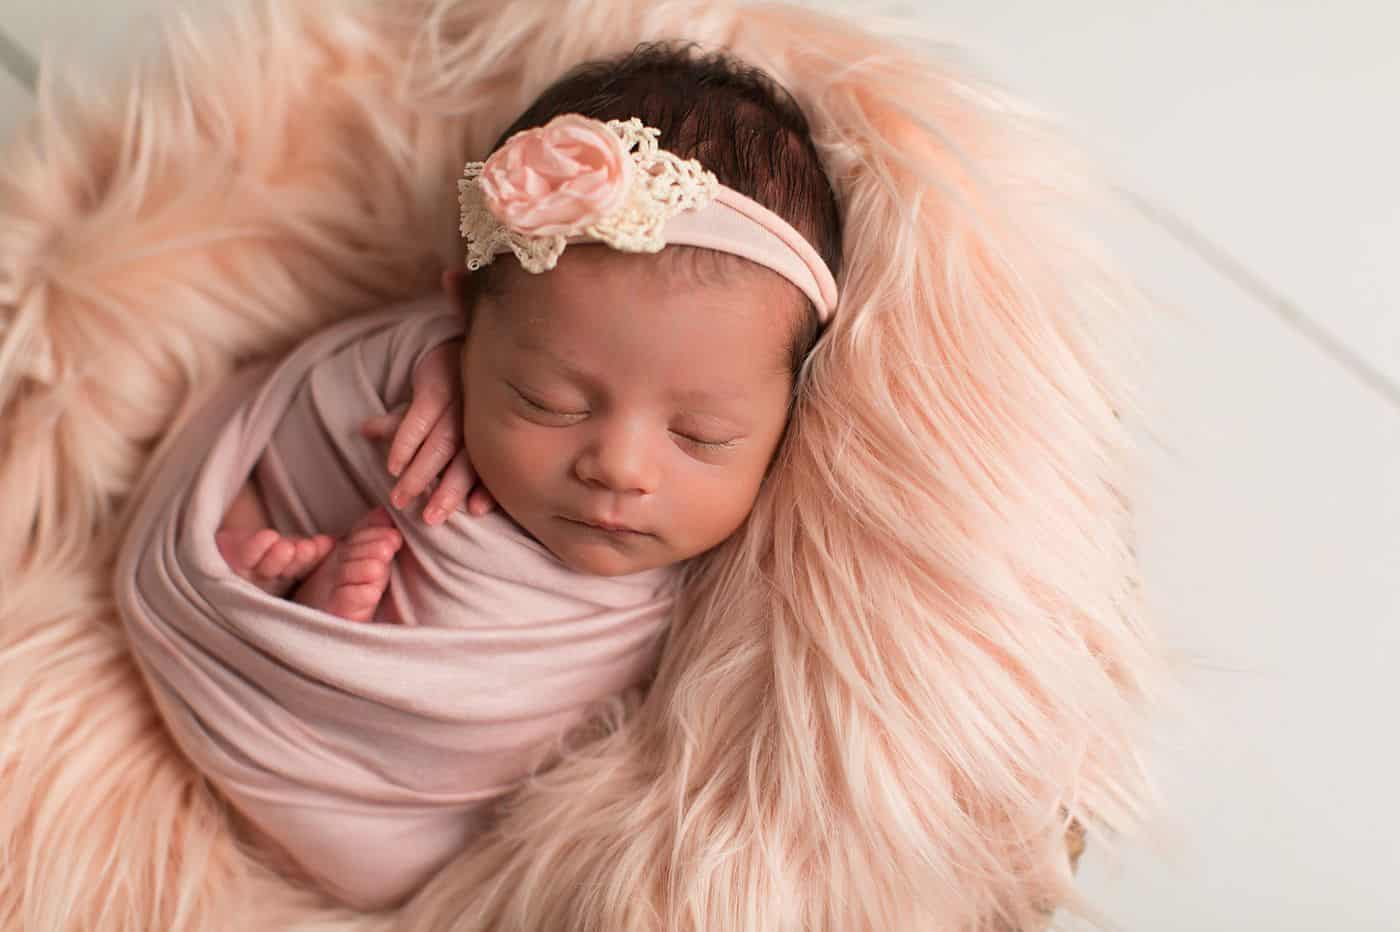 Newborn Photography Props: How To Make Photos That Are Classy & Cute